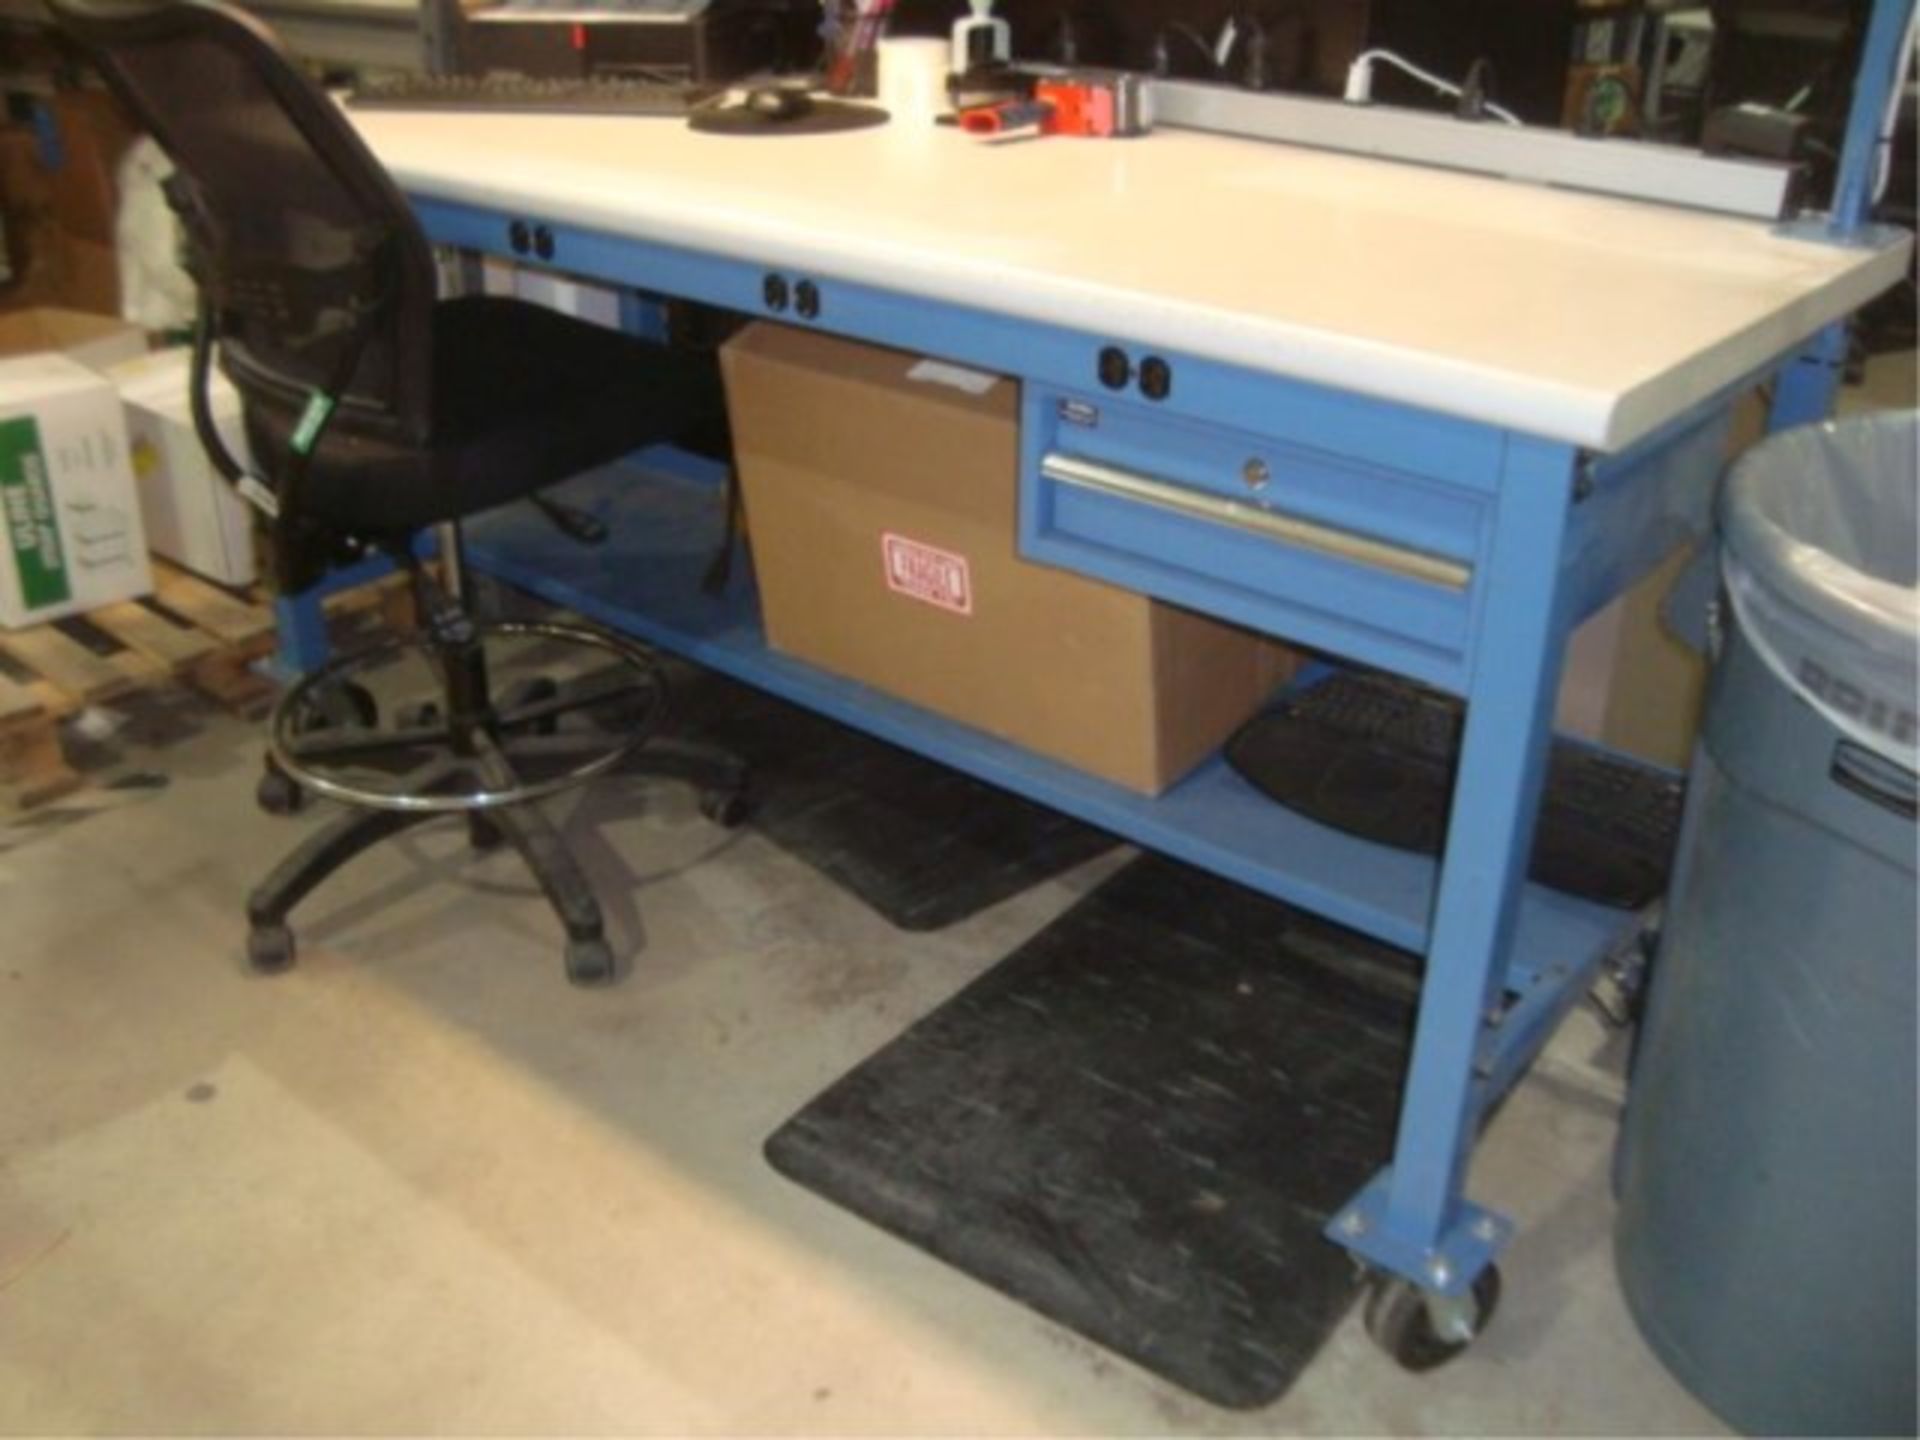 Mobile Workstation Benches & Chairs - Image 8 of 9